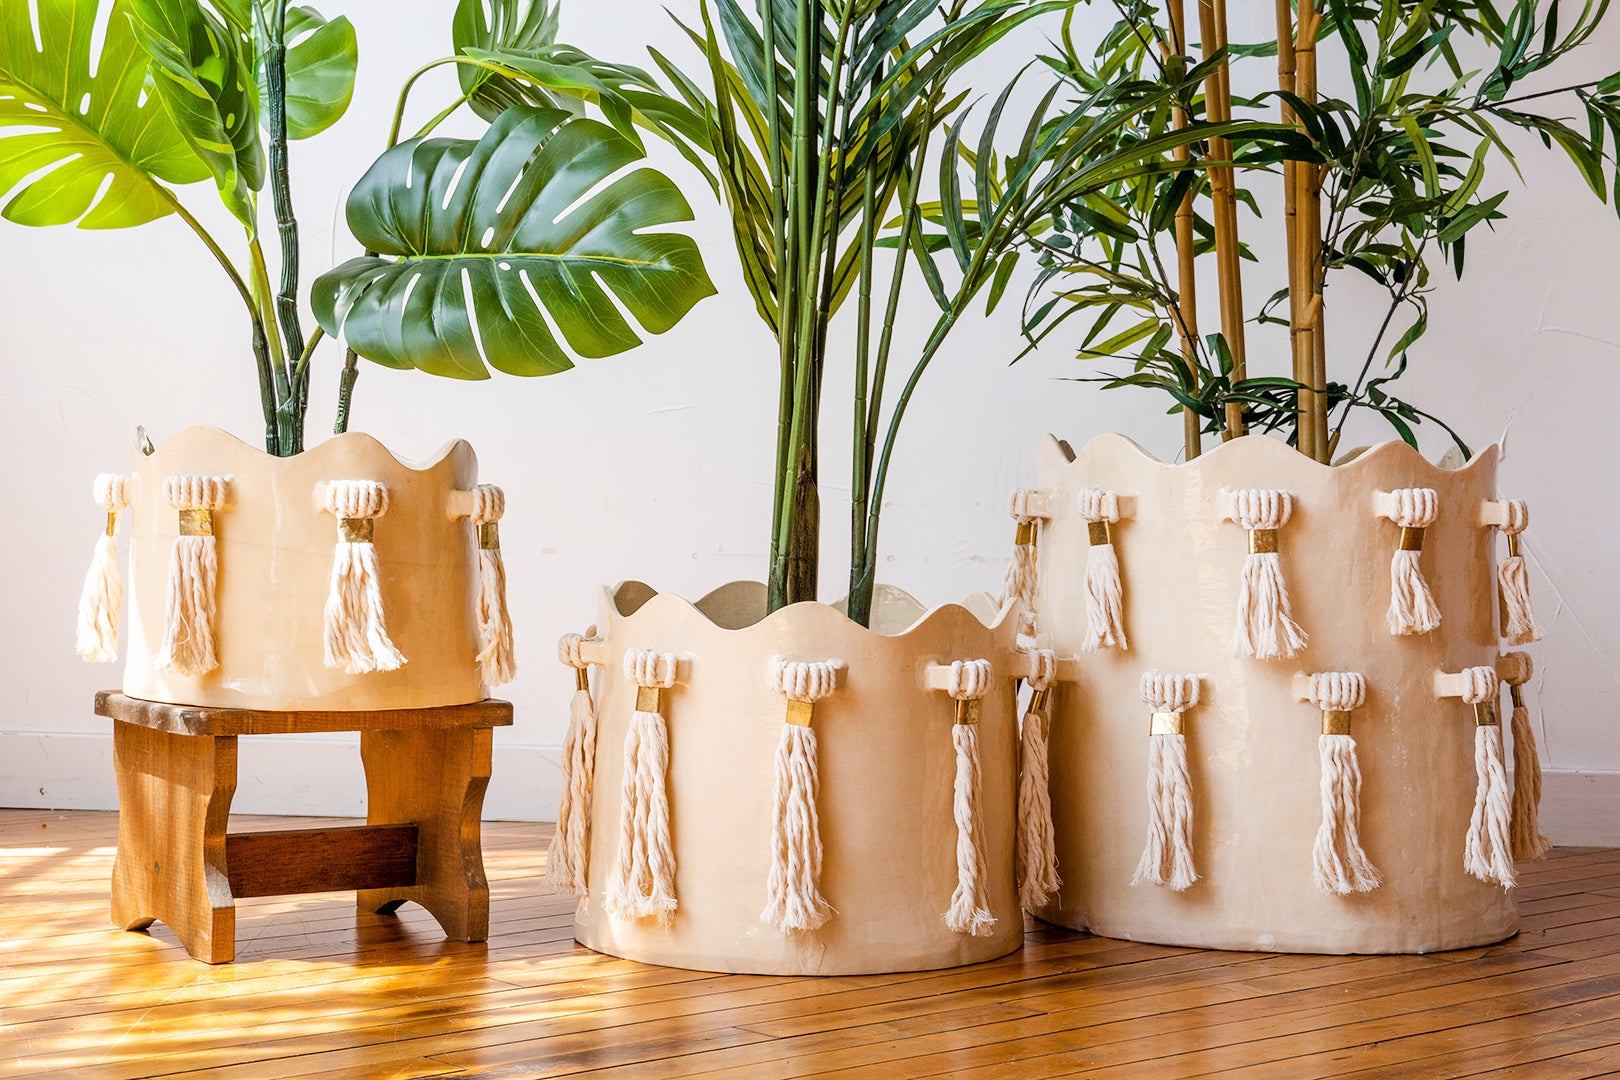 At This Atlanta Furniture Shop, an All-Women Staff Designs, Sculpts, and Builds Every Product